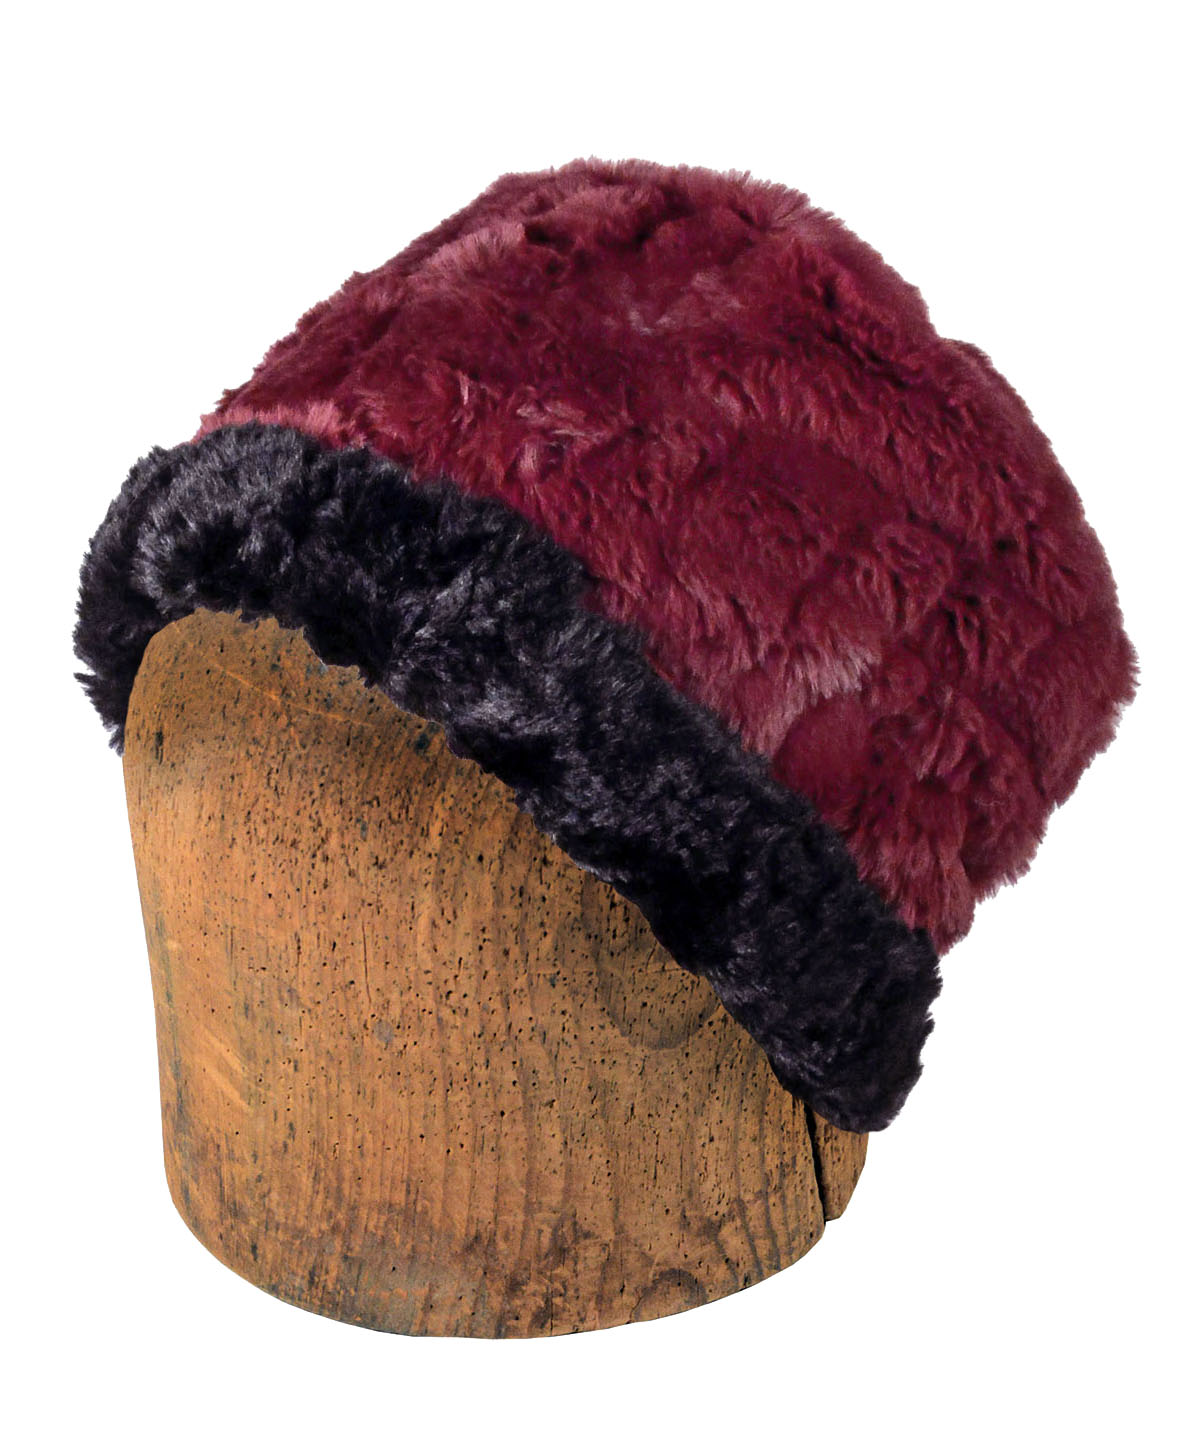 Men&#39;s 2-tone Cuffed Pillbox | Luxury Faux Fur in Cranberry Creek and Cuddly Black Faux Fur | Handmade in Seattle WA by Pandemonium Millinery USA